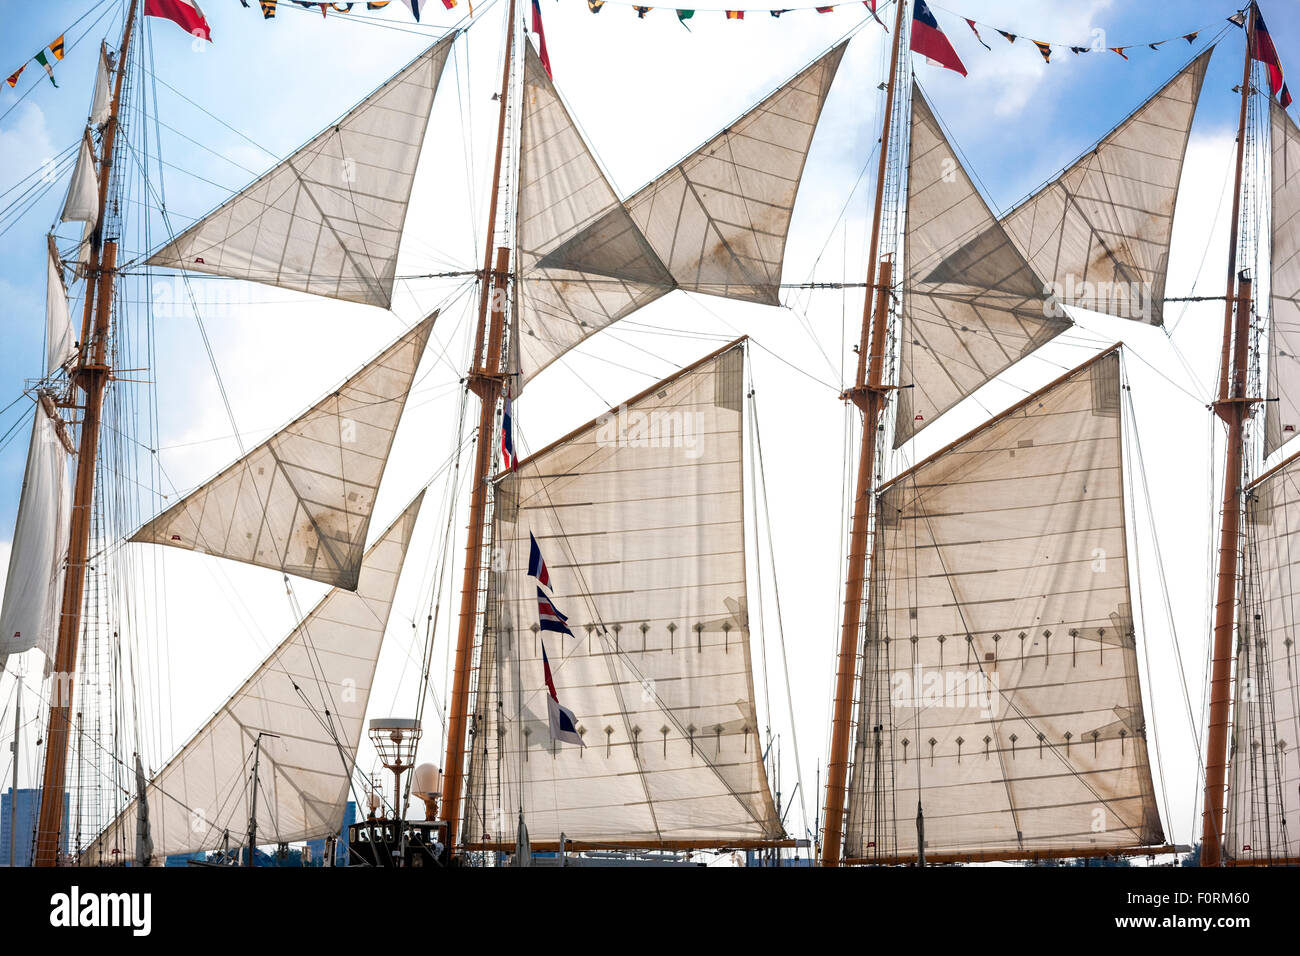 The tall ship Esmeralda from Chile, Amsterdam Sail 2015 Stock Photo